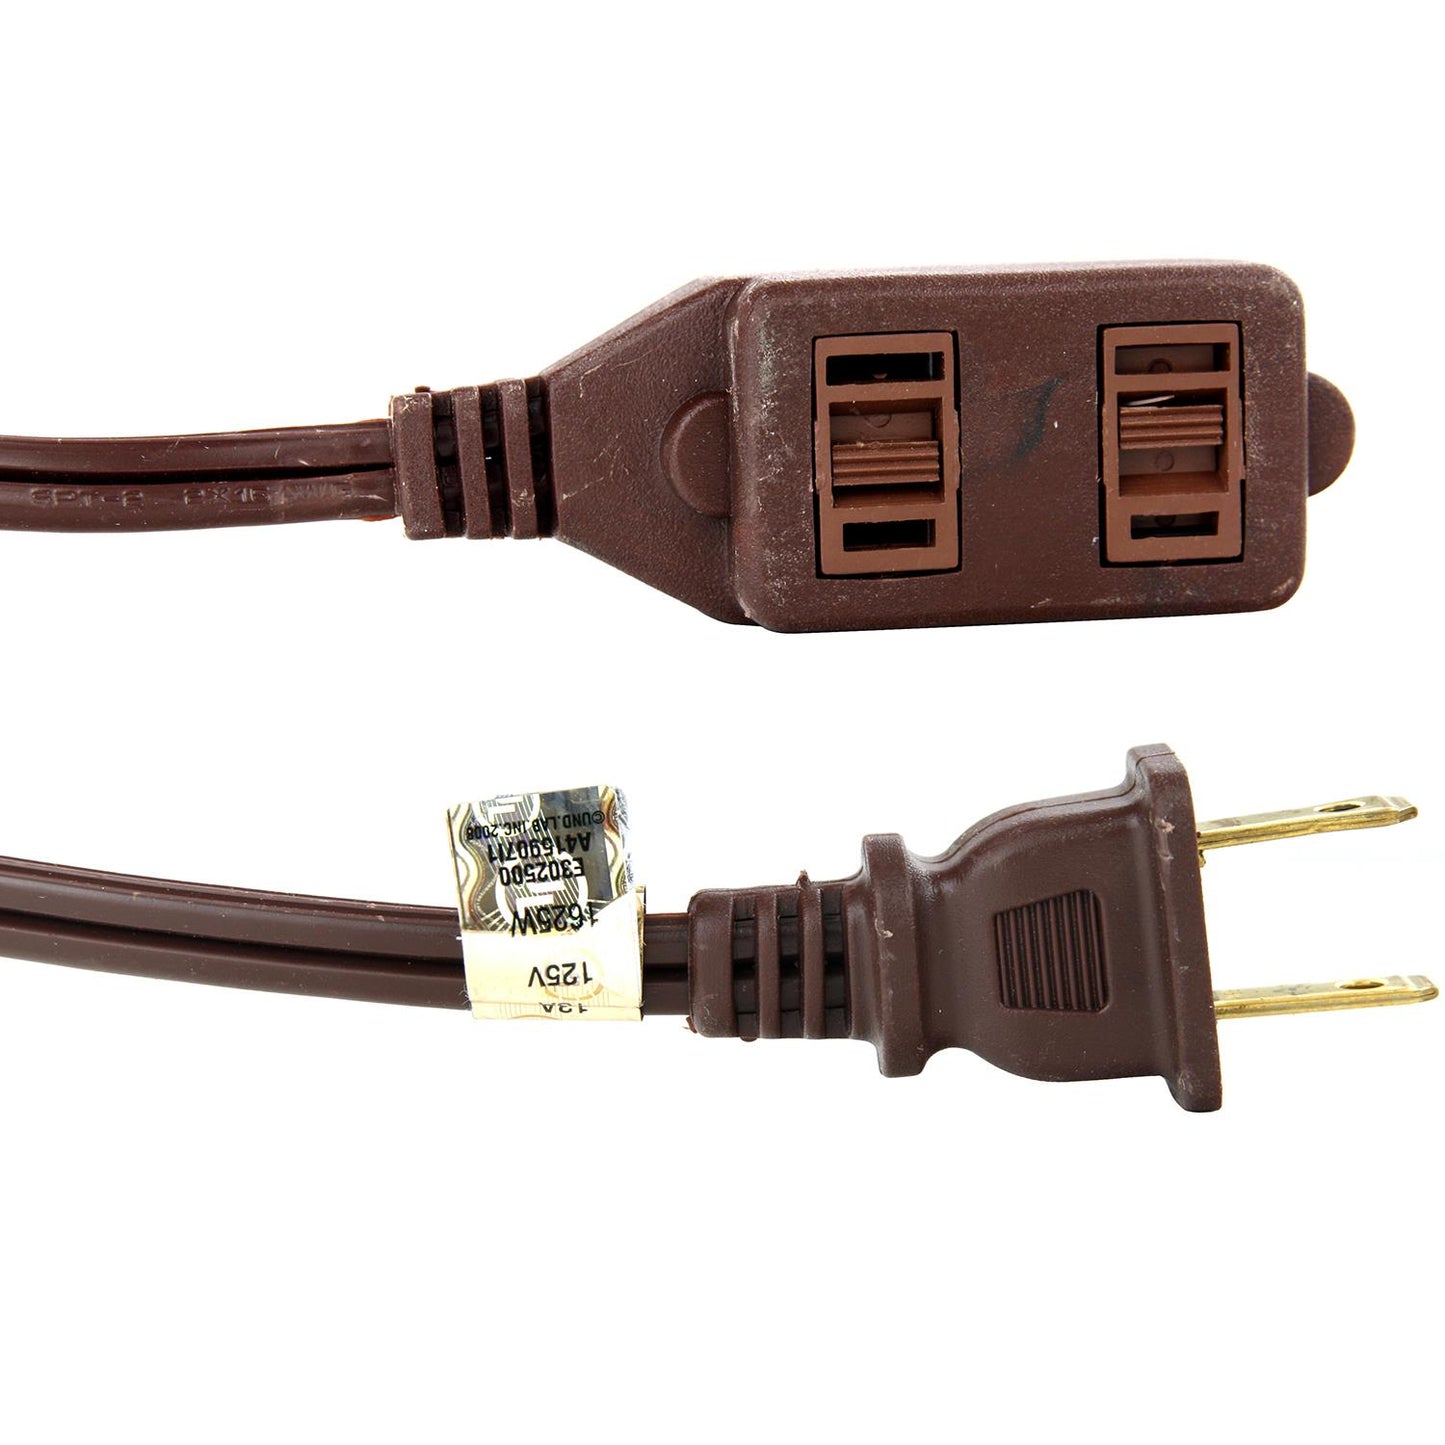 Sunlite EX20/BR Household 20-Feet Extension Cord, Brown